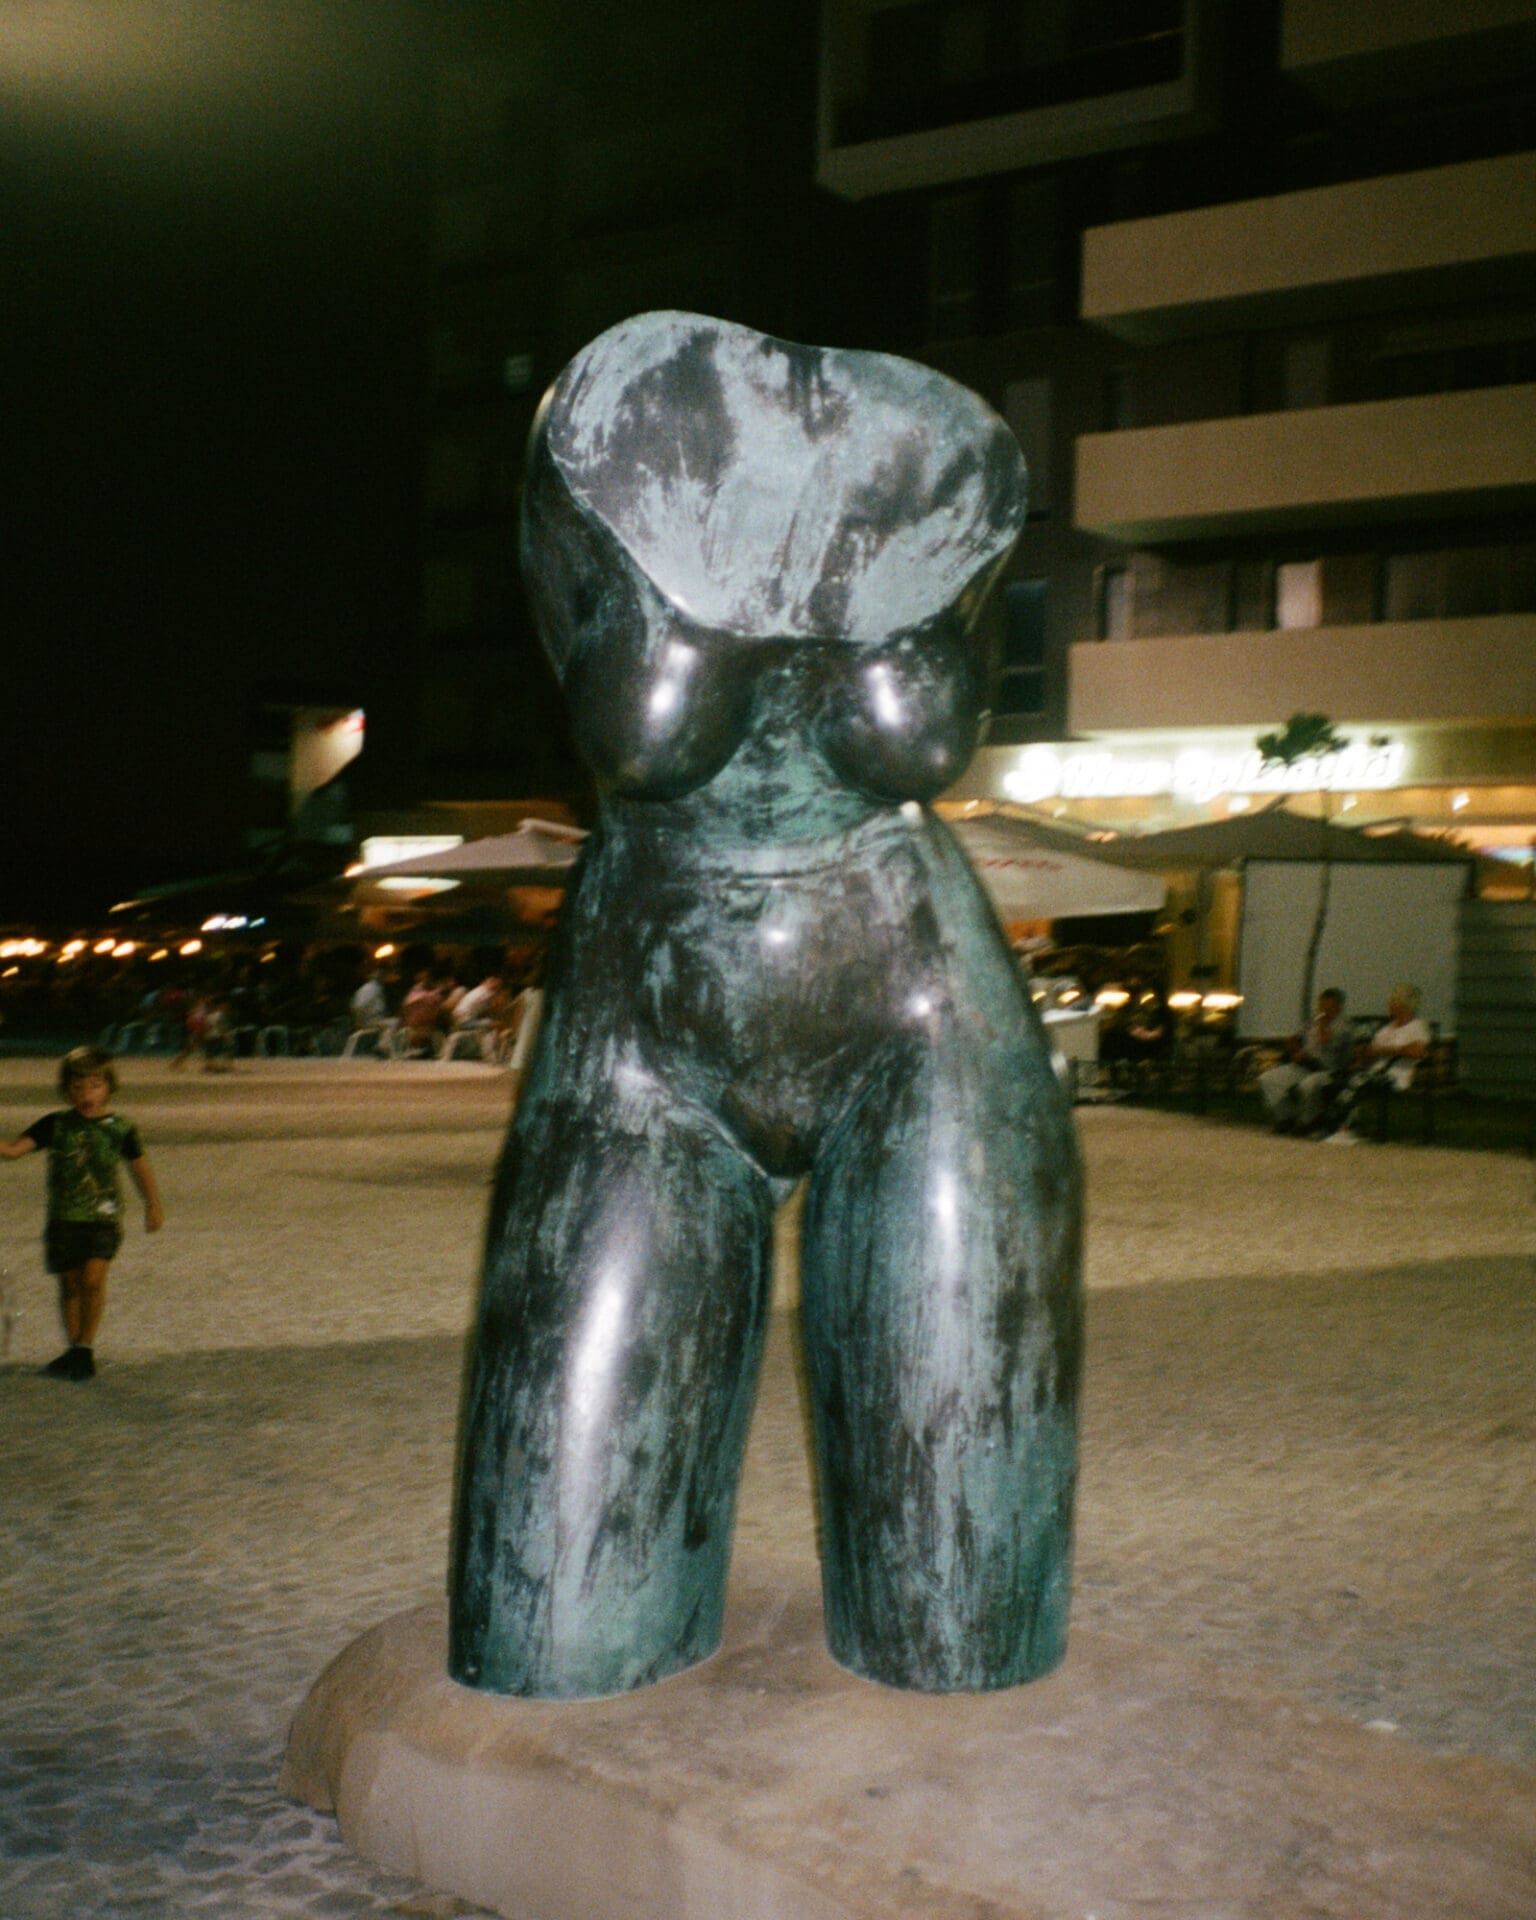 Hazel Gaskin photographs Albania | A metal statue of a woman's body in a square at night